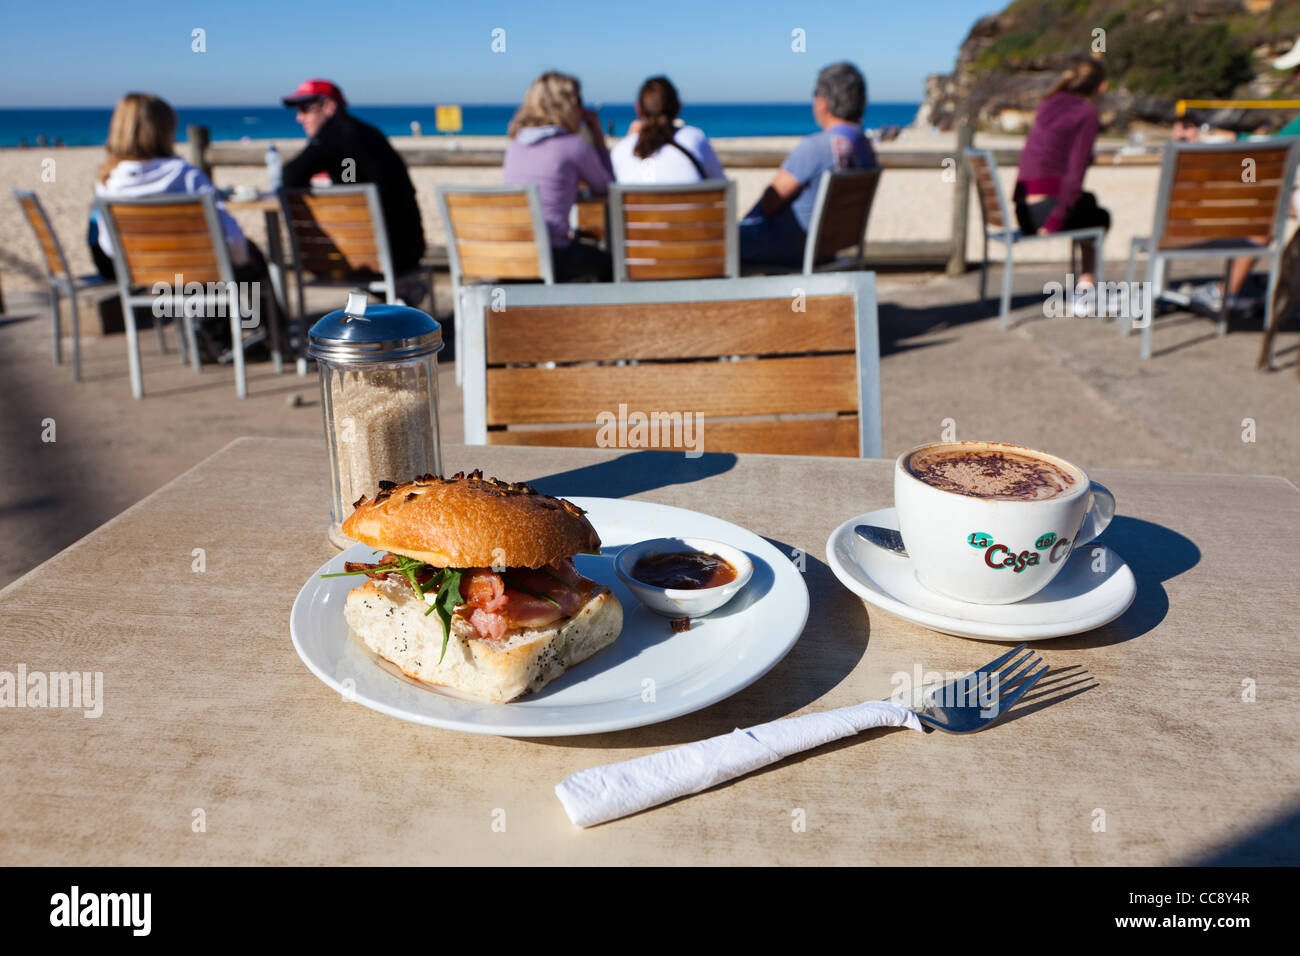 Breakfast at Tamarama Beach Sydney with coffee and sandwich. Outside on table with people in the background Stock Photo